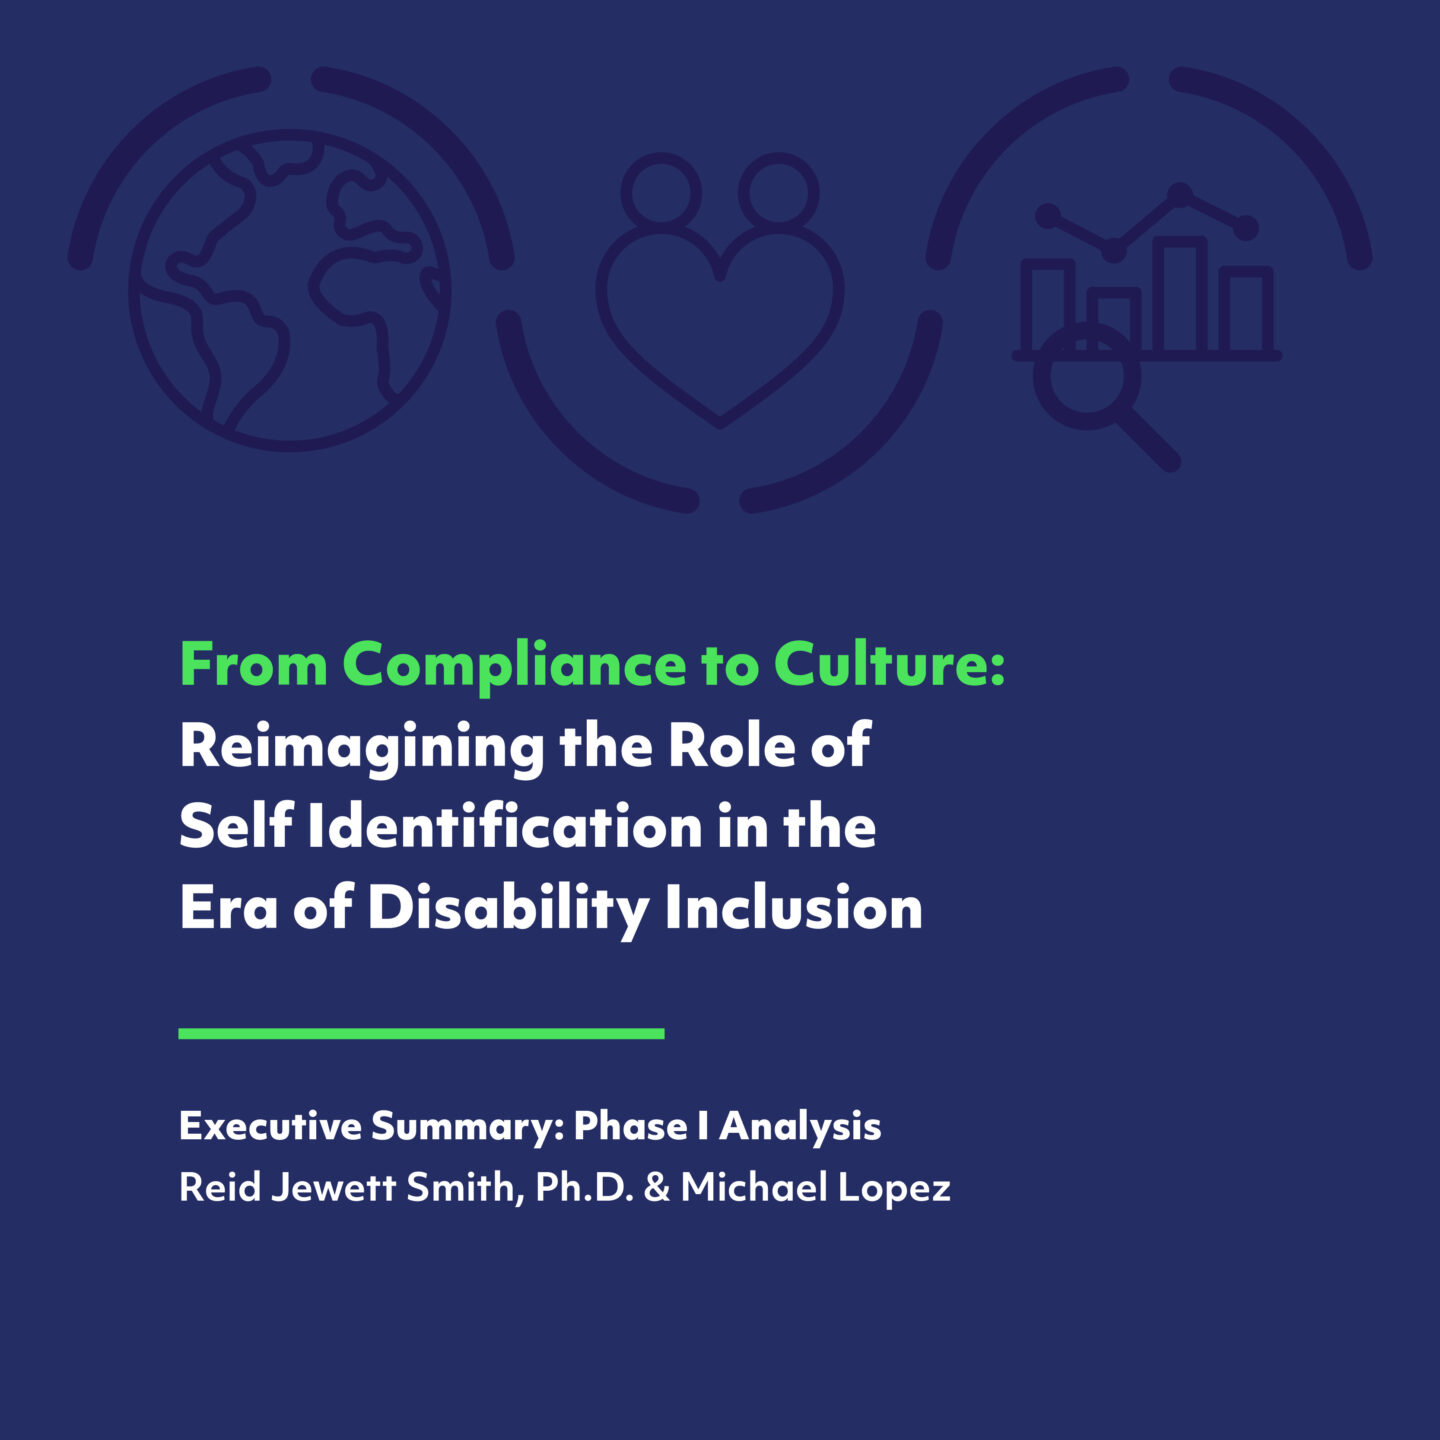 Navy blue design with global, collaborative, and graphic icons with text: From Compliance to Culture: Reimagining the Role of Self Identification in the Era of Disability Inclusion, Executive Summary: Phase I Analysis by Reid Jewett Smith, Ph.D. & Michael Lopez